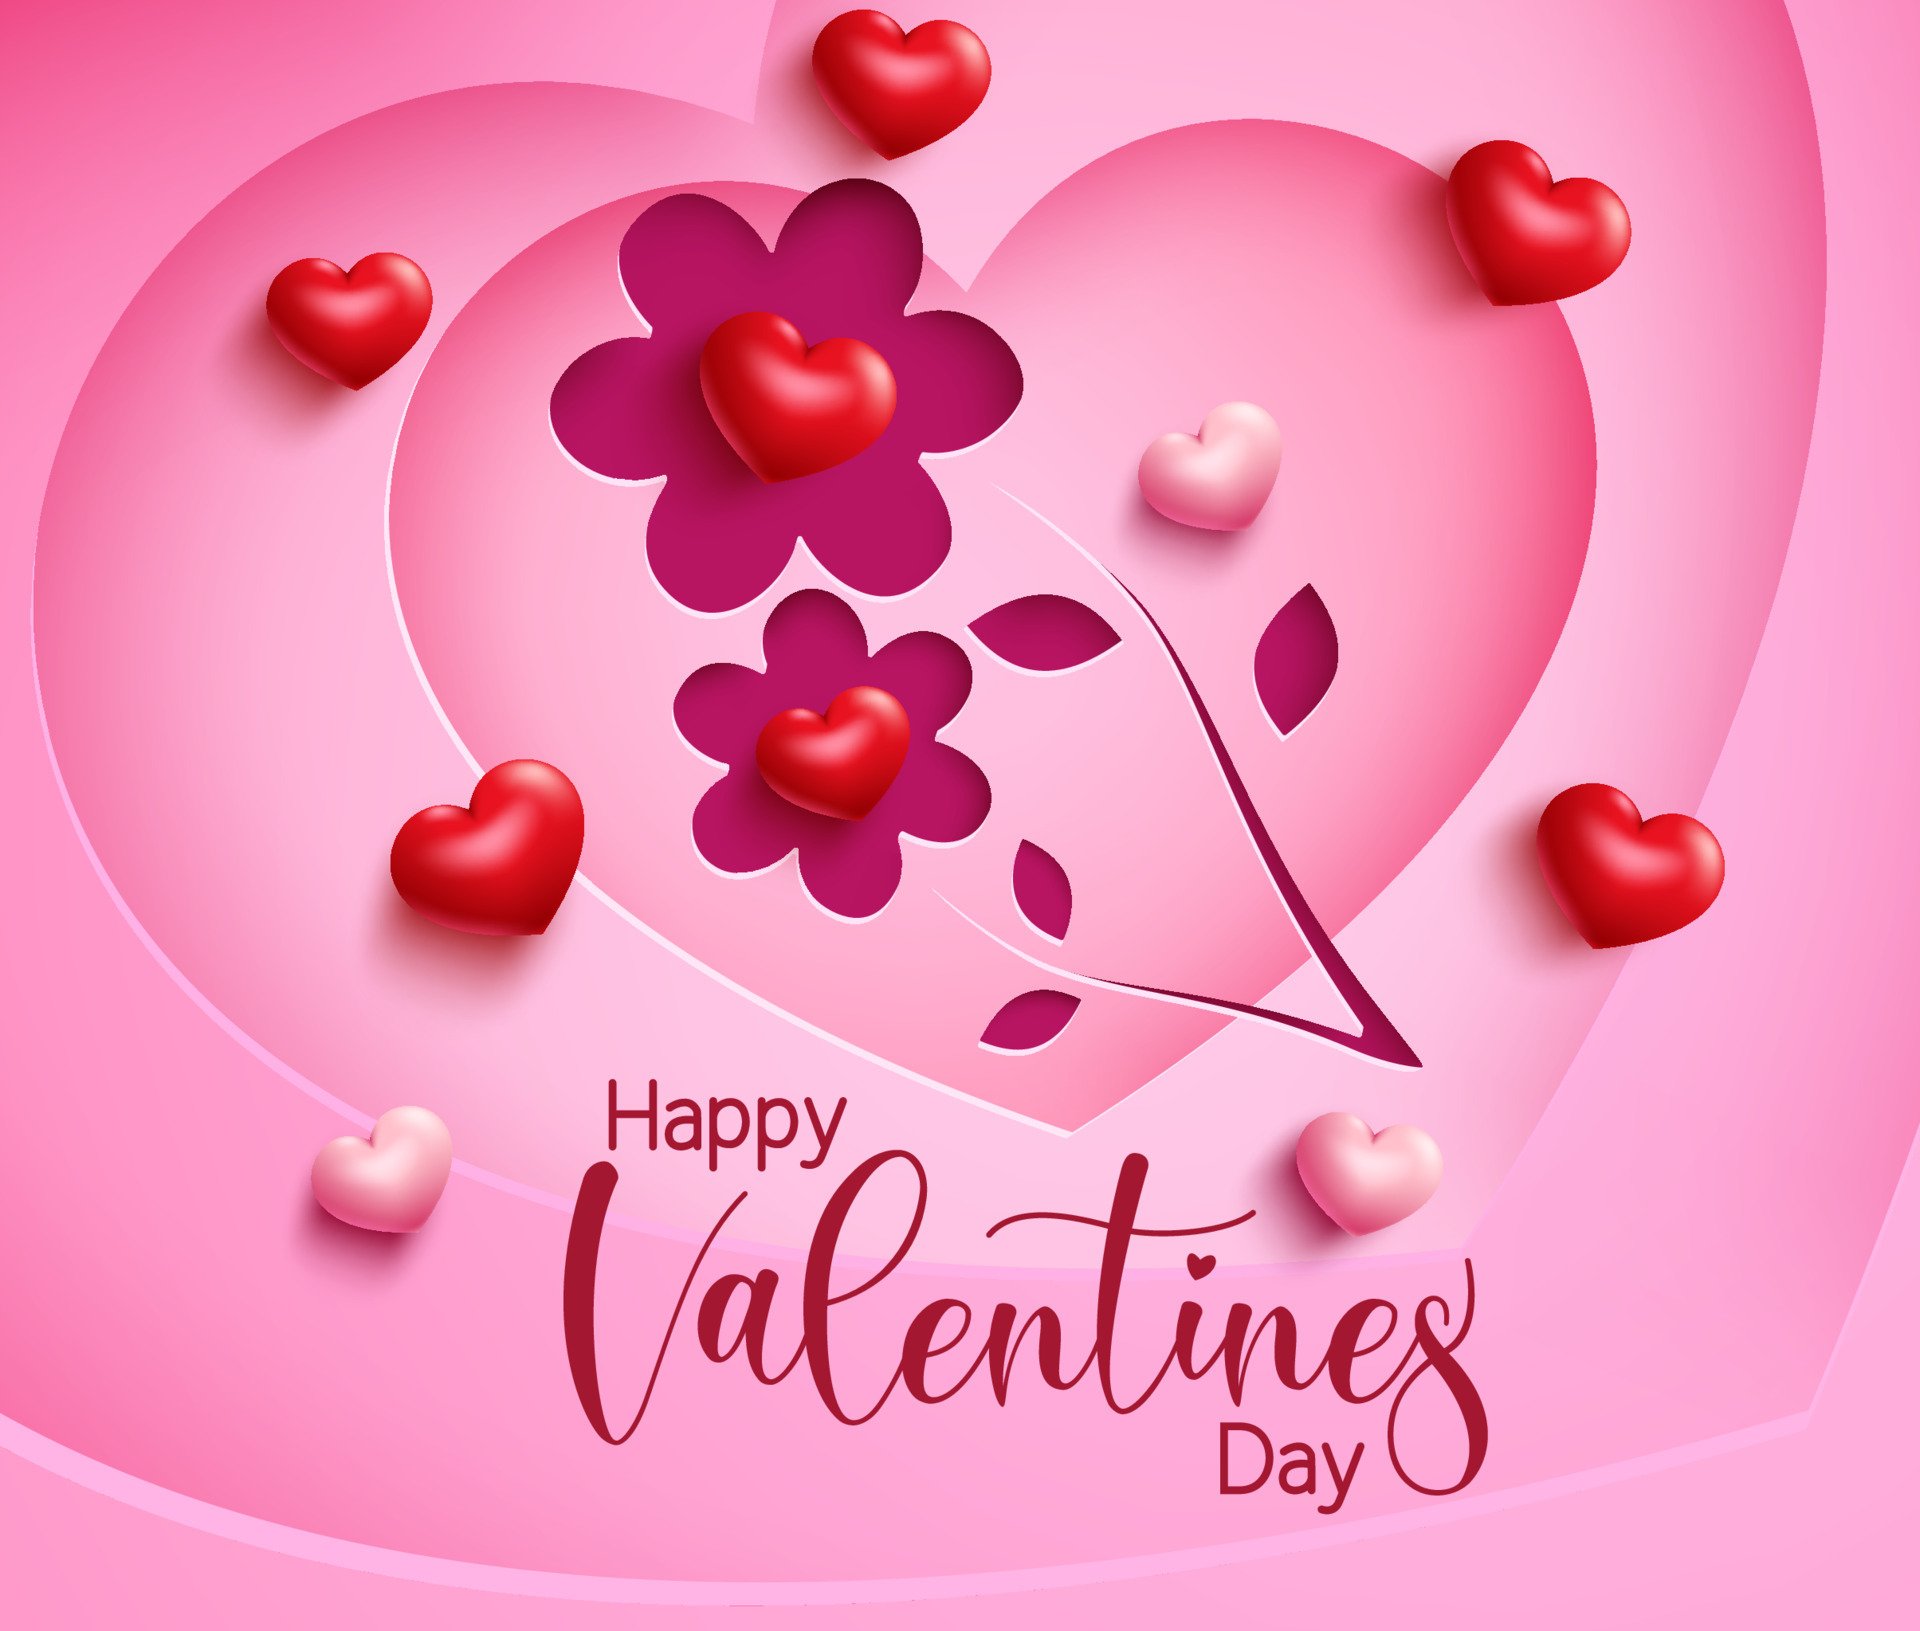 Valentines flower vector background design. Happy valentine's day text with paper cut flowers shape and 3D heart element for sweet and cute valentine greeting design. Vector illustration